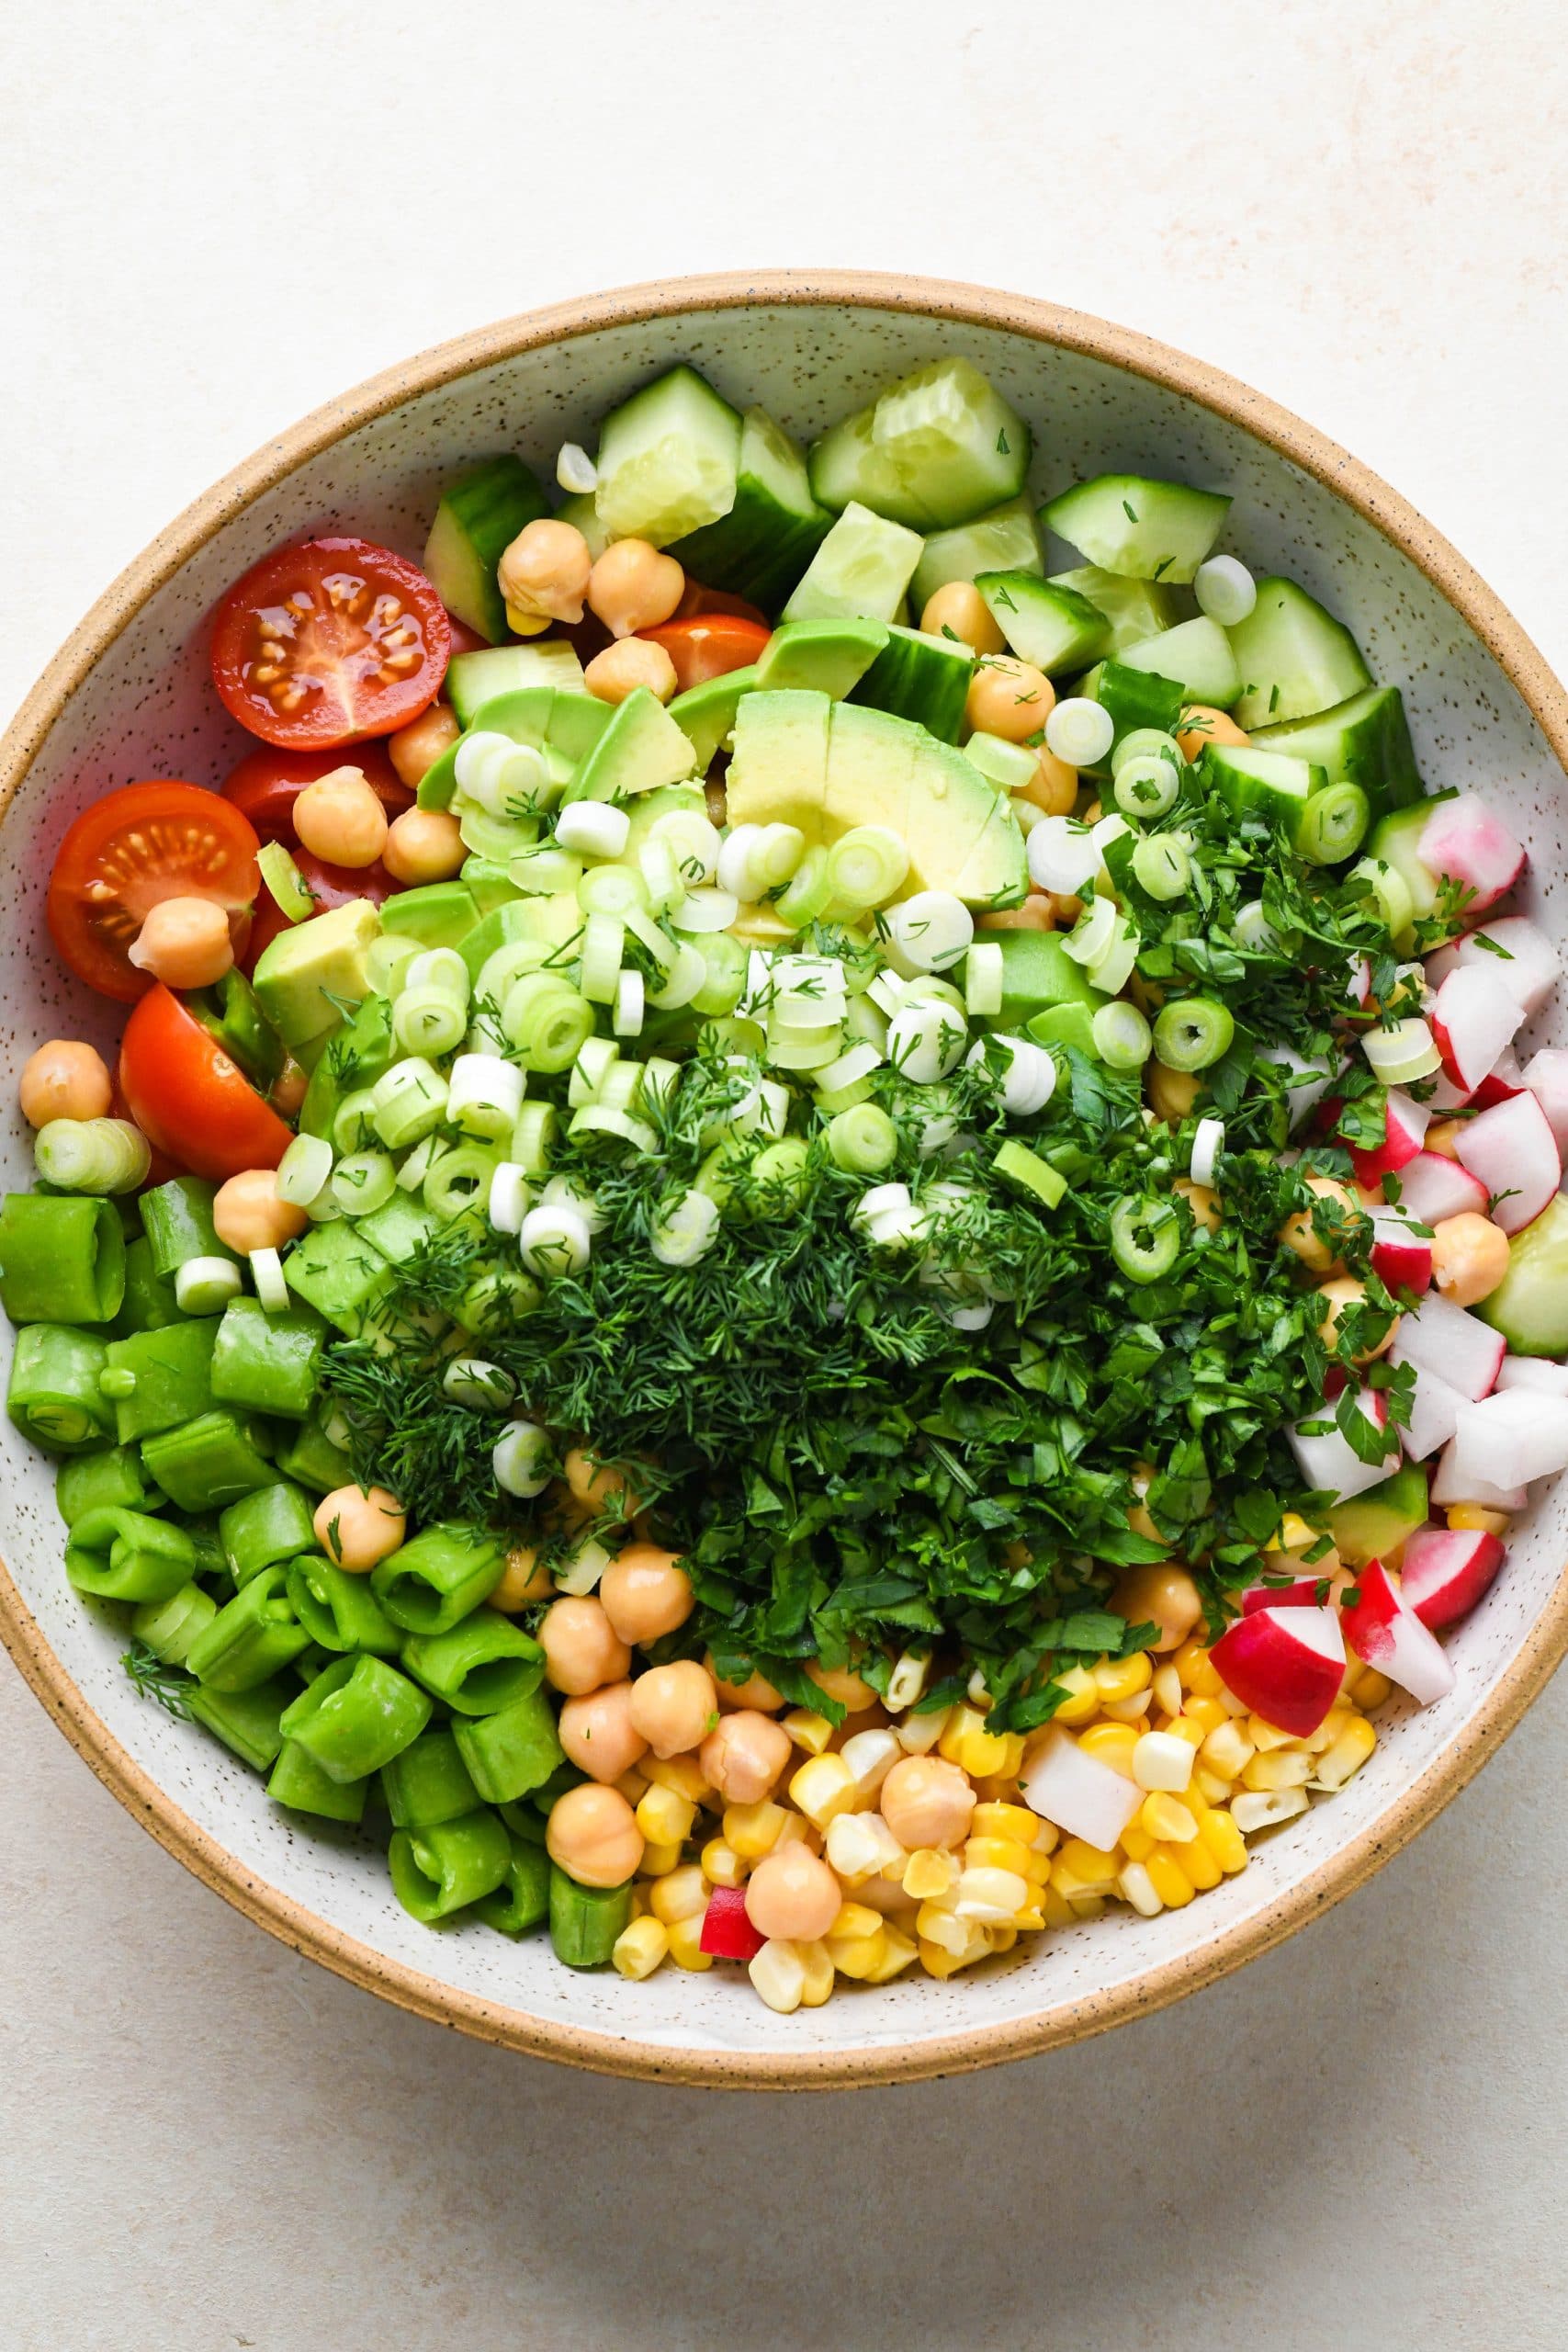 How to make vegan chickpea salad: Salad ingredients in a large bowl topped with fresh herbs and lemony dressing.